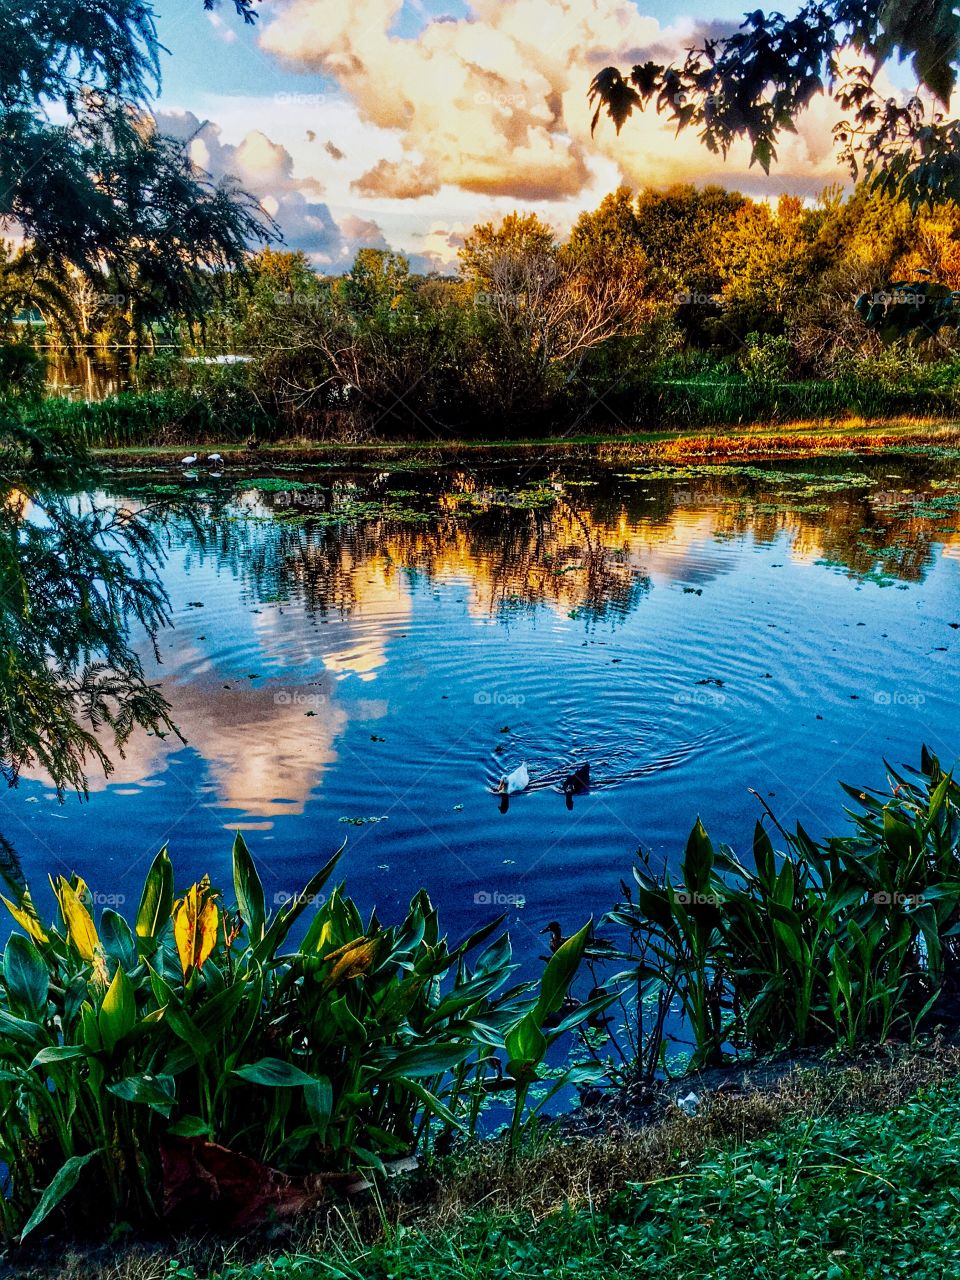 Autumn is here! Sunset over pond with ducks